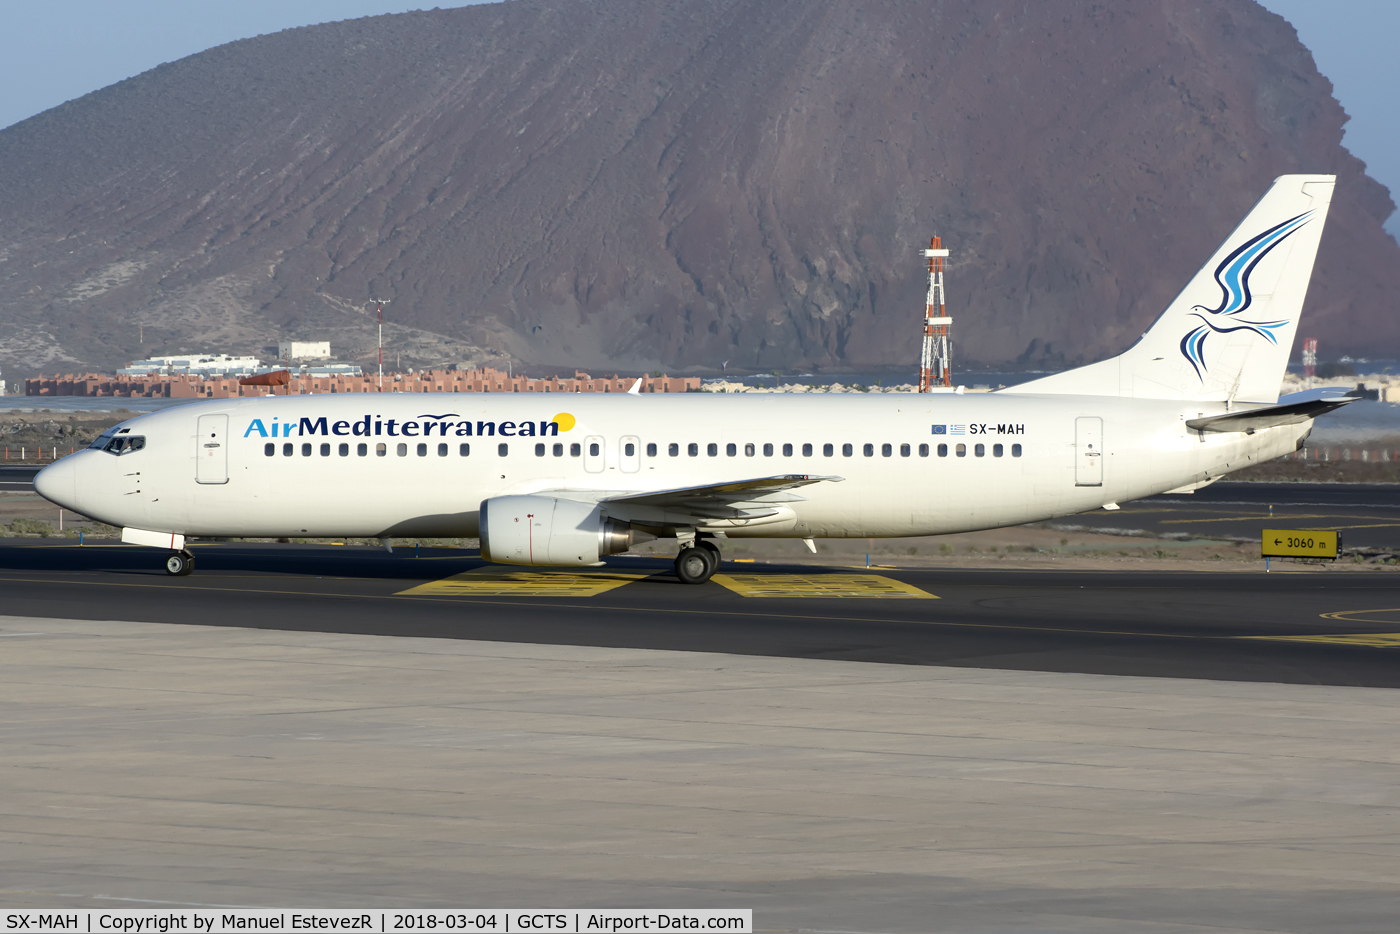 SX-MAH, 1990 Boeing 737-405 C/N 24643, First visit to Tenerife South Airport, flying to Small Planet Aero.